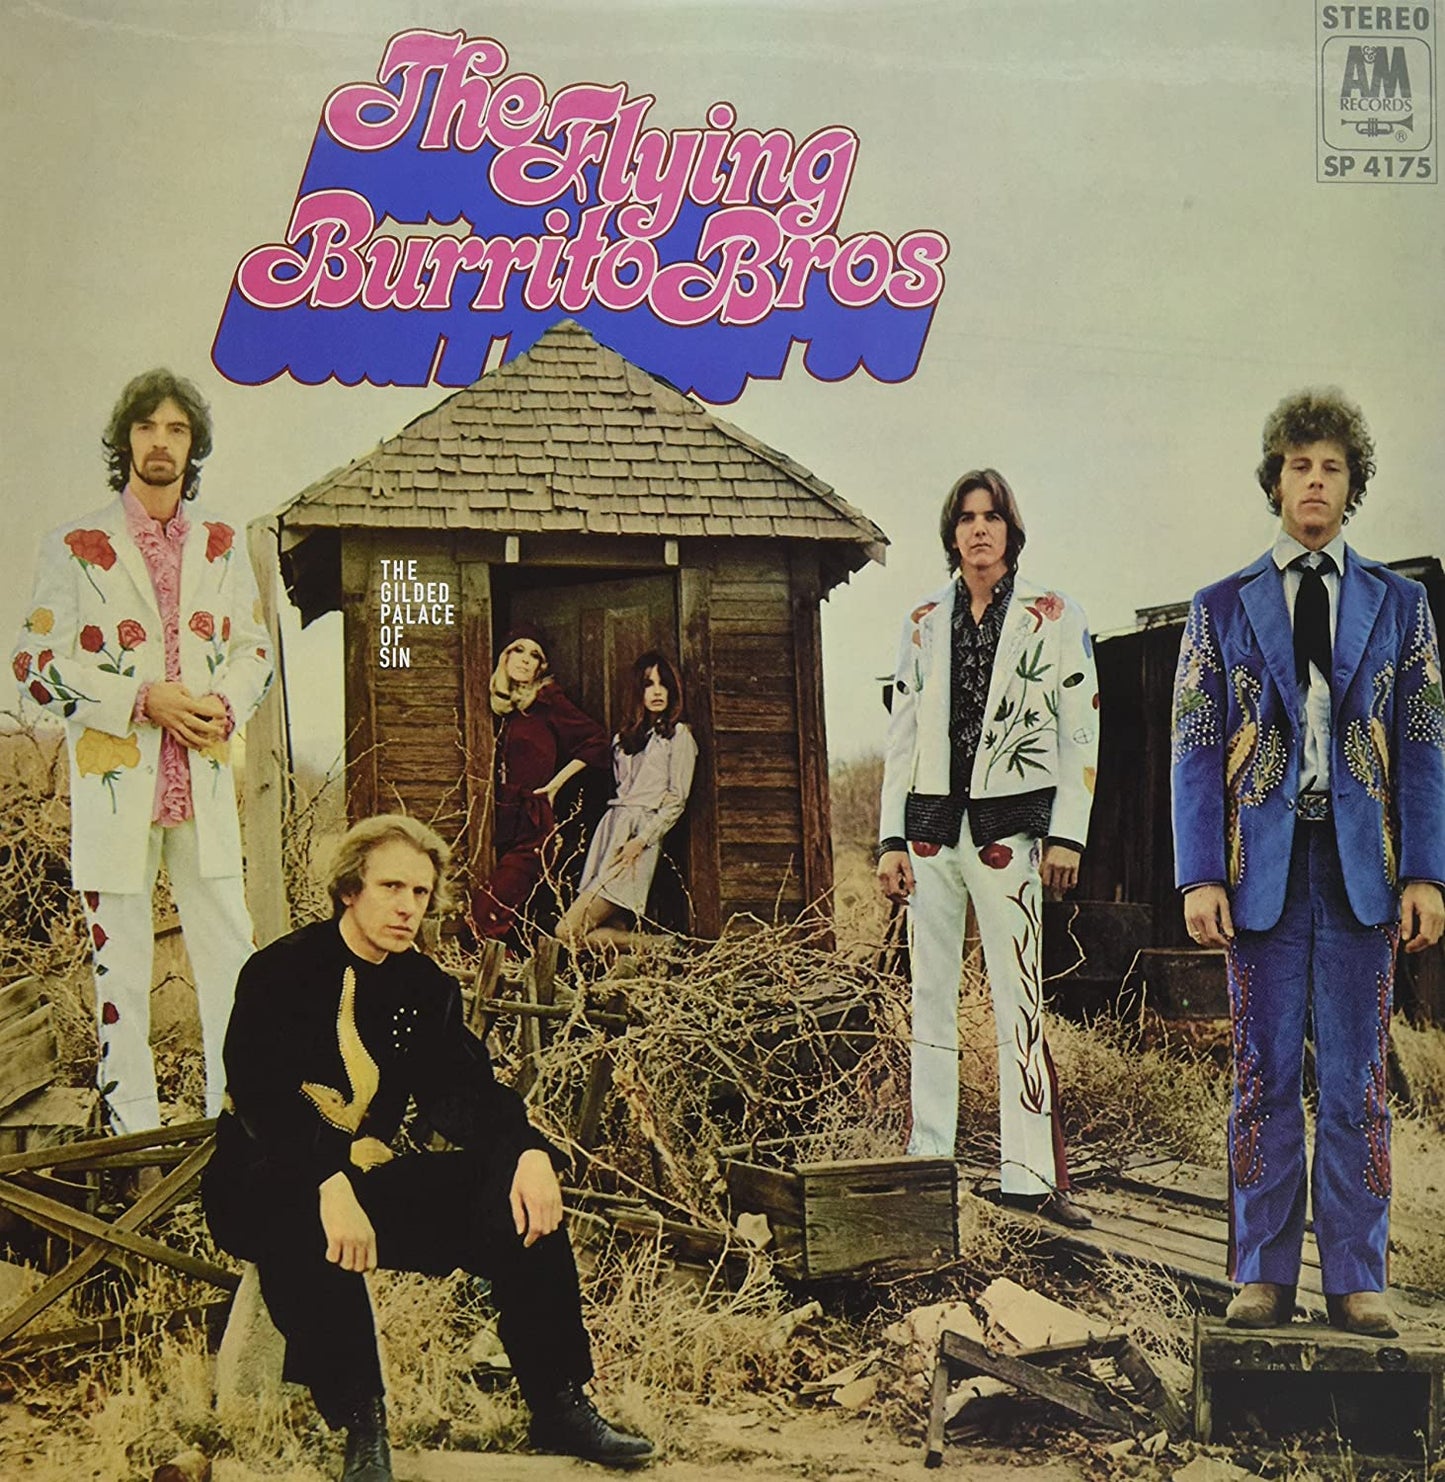 Flying Burrito Brothers, The/The Gilded Palace Of Sin (Audiophile Pressing) [LP]